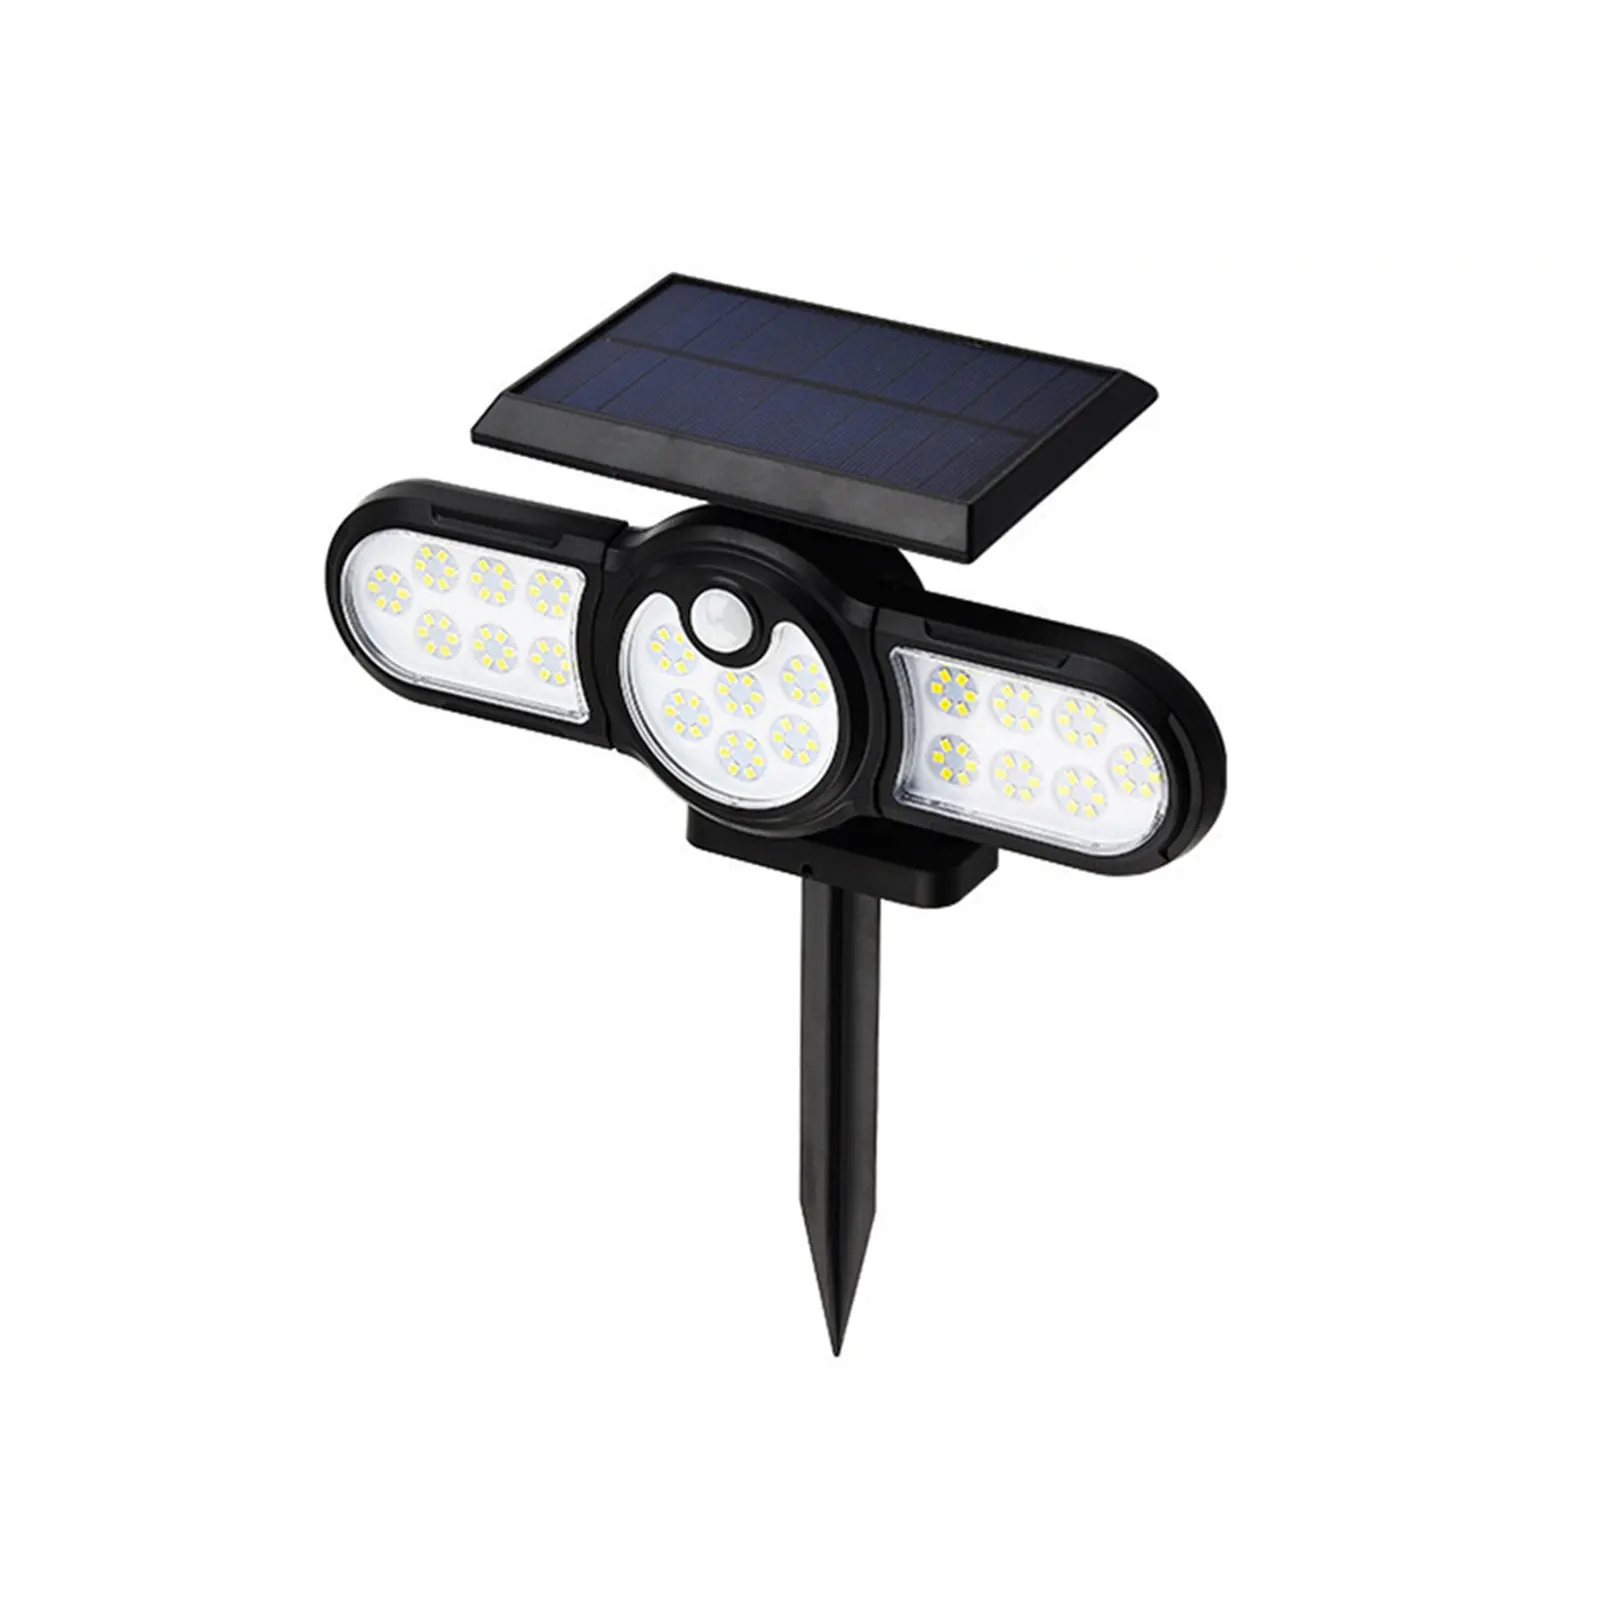 

LED Solar Security Light 3 Heads Adjustable Solar Powered Path Lights for Yard Patio Garden Porch Pathway